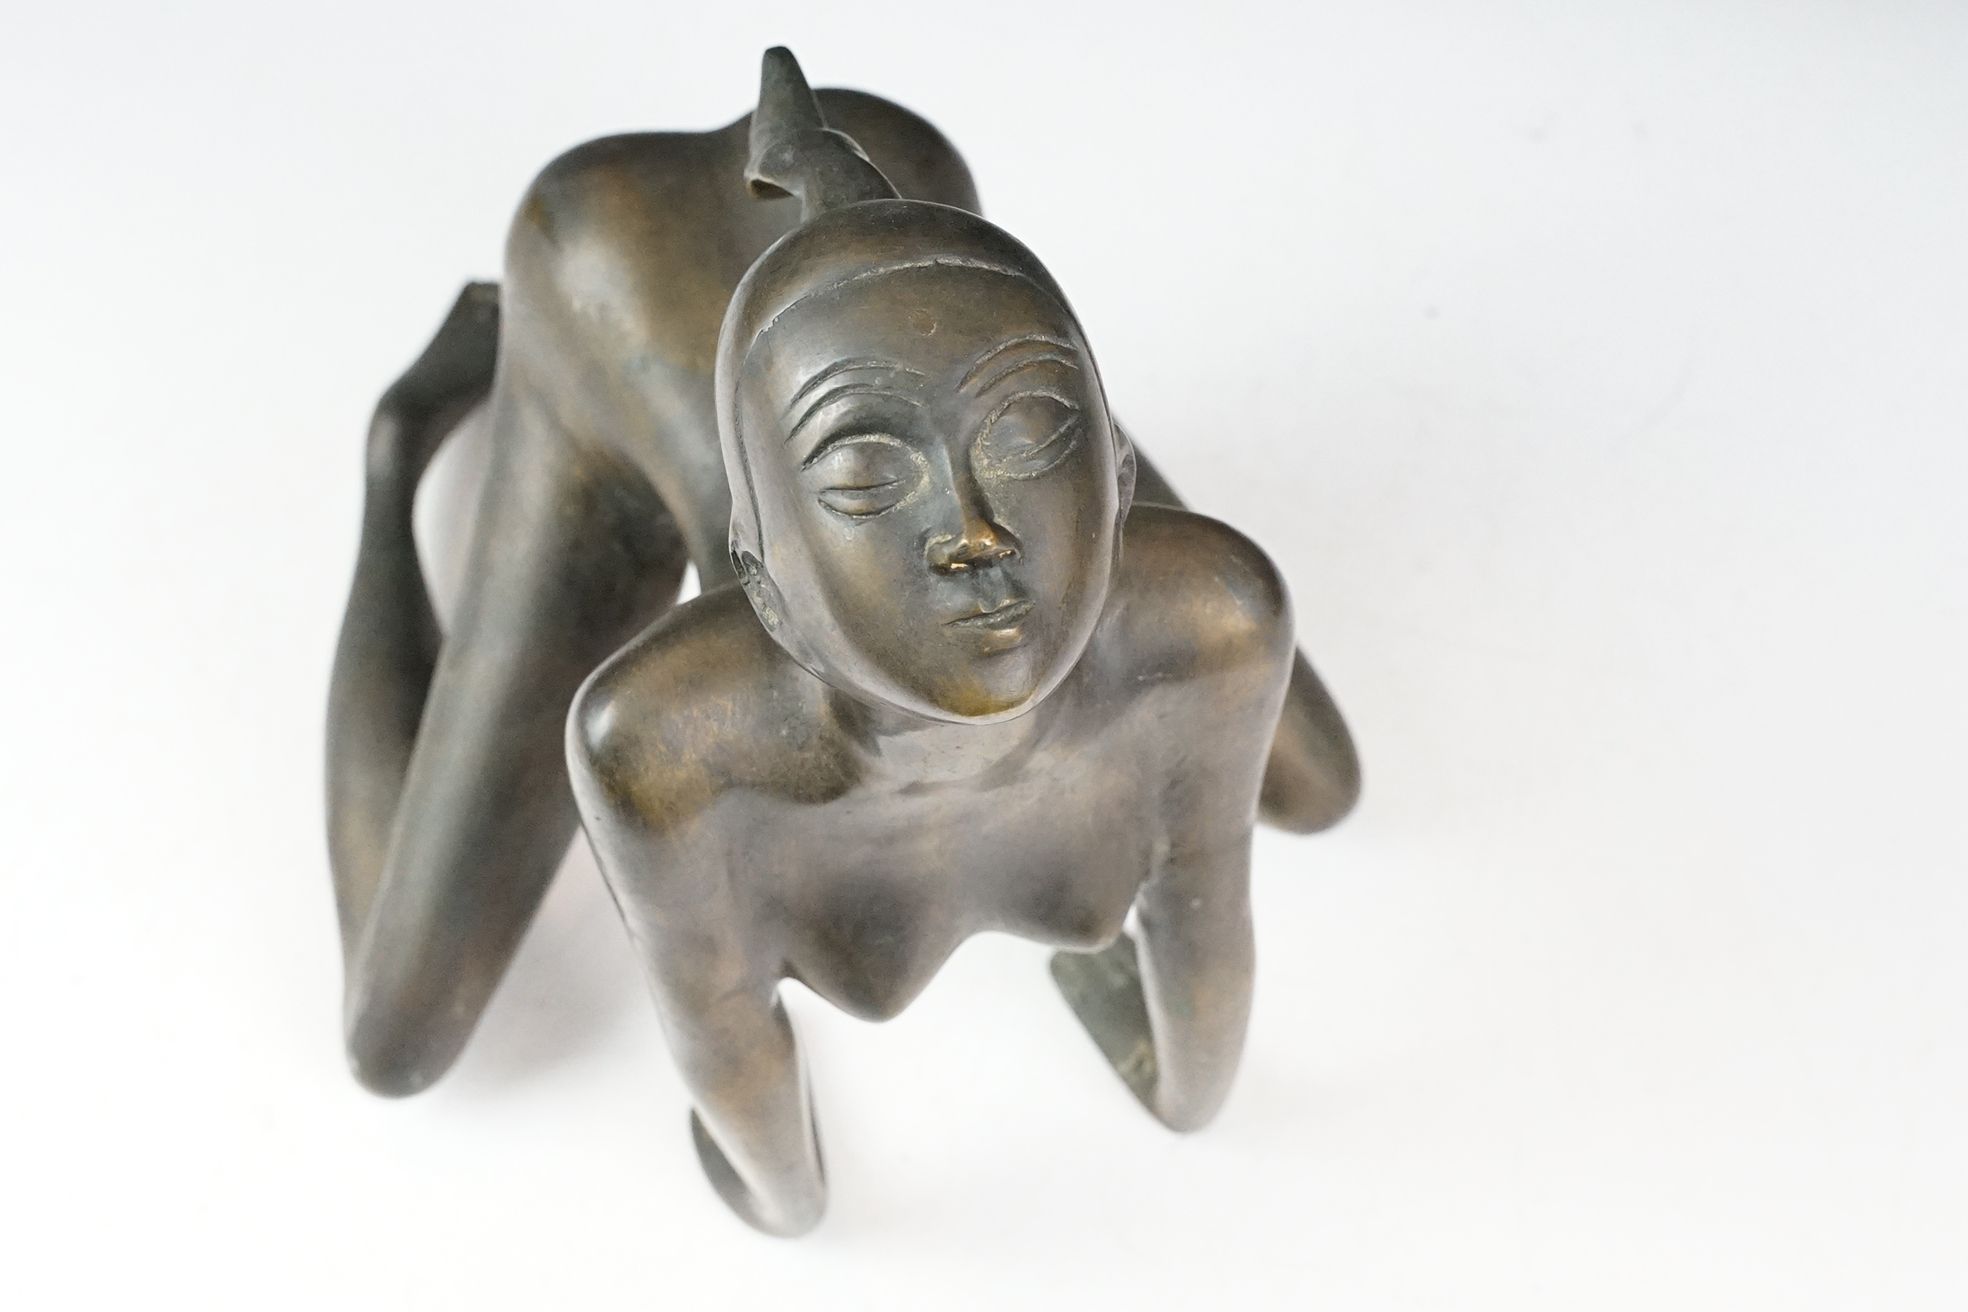 Erotic bronze sculpture depicting a nude female, approx 25cm tall - Image 5 of 7